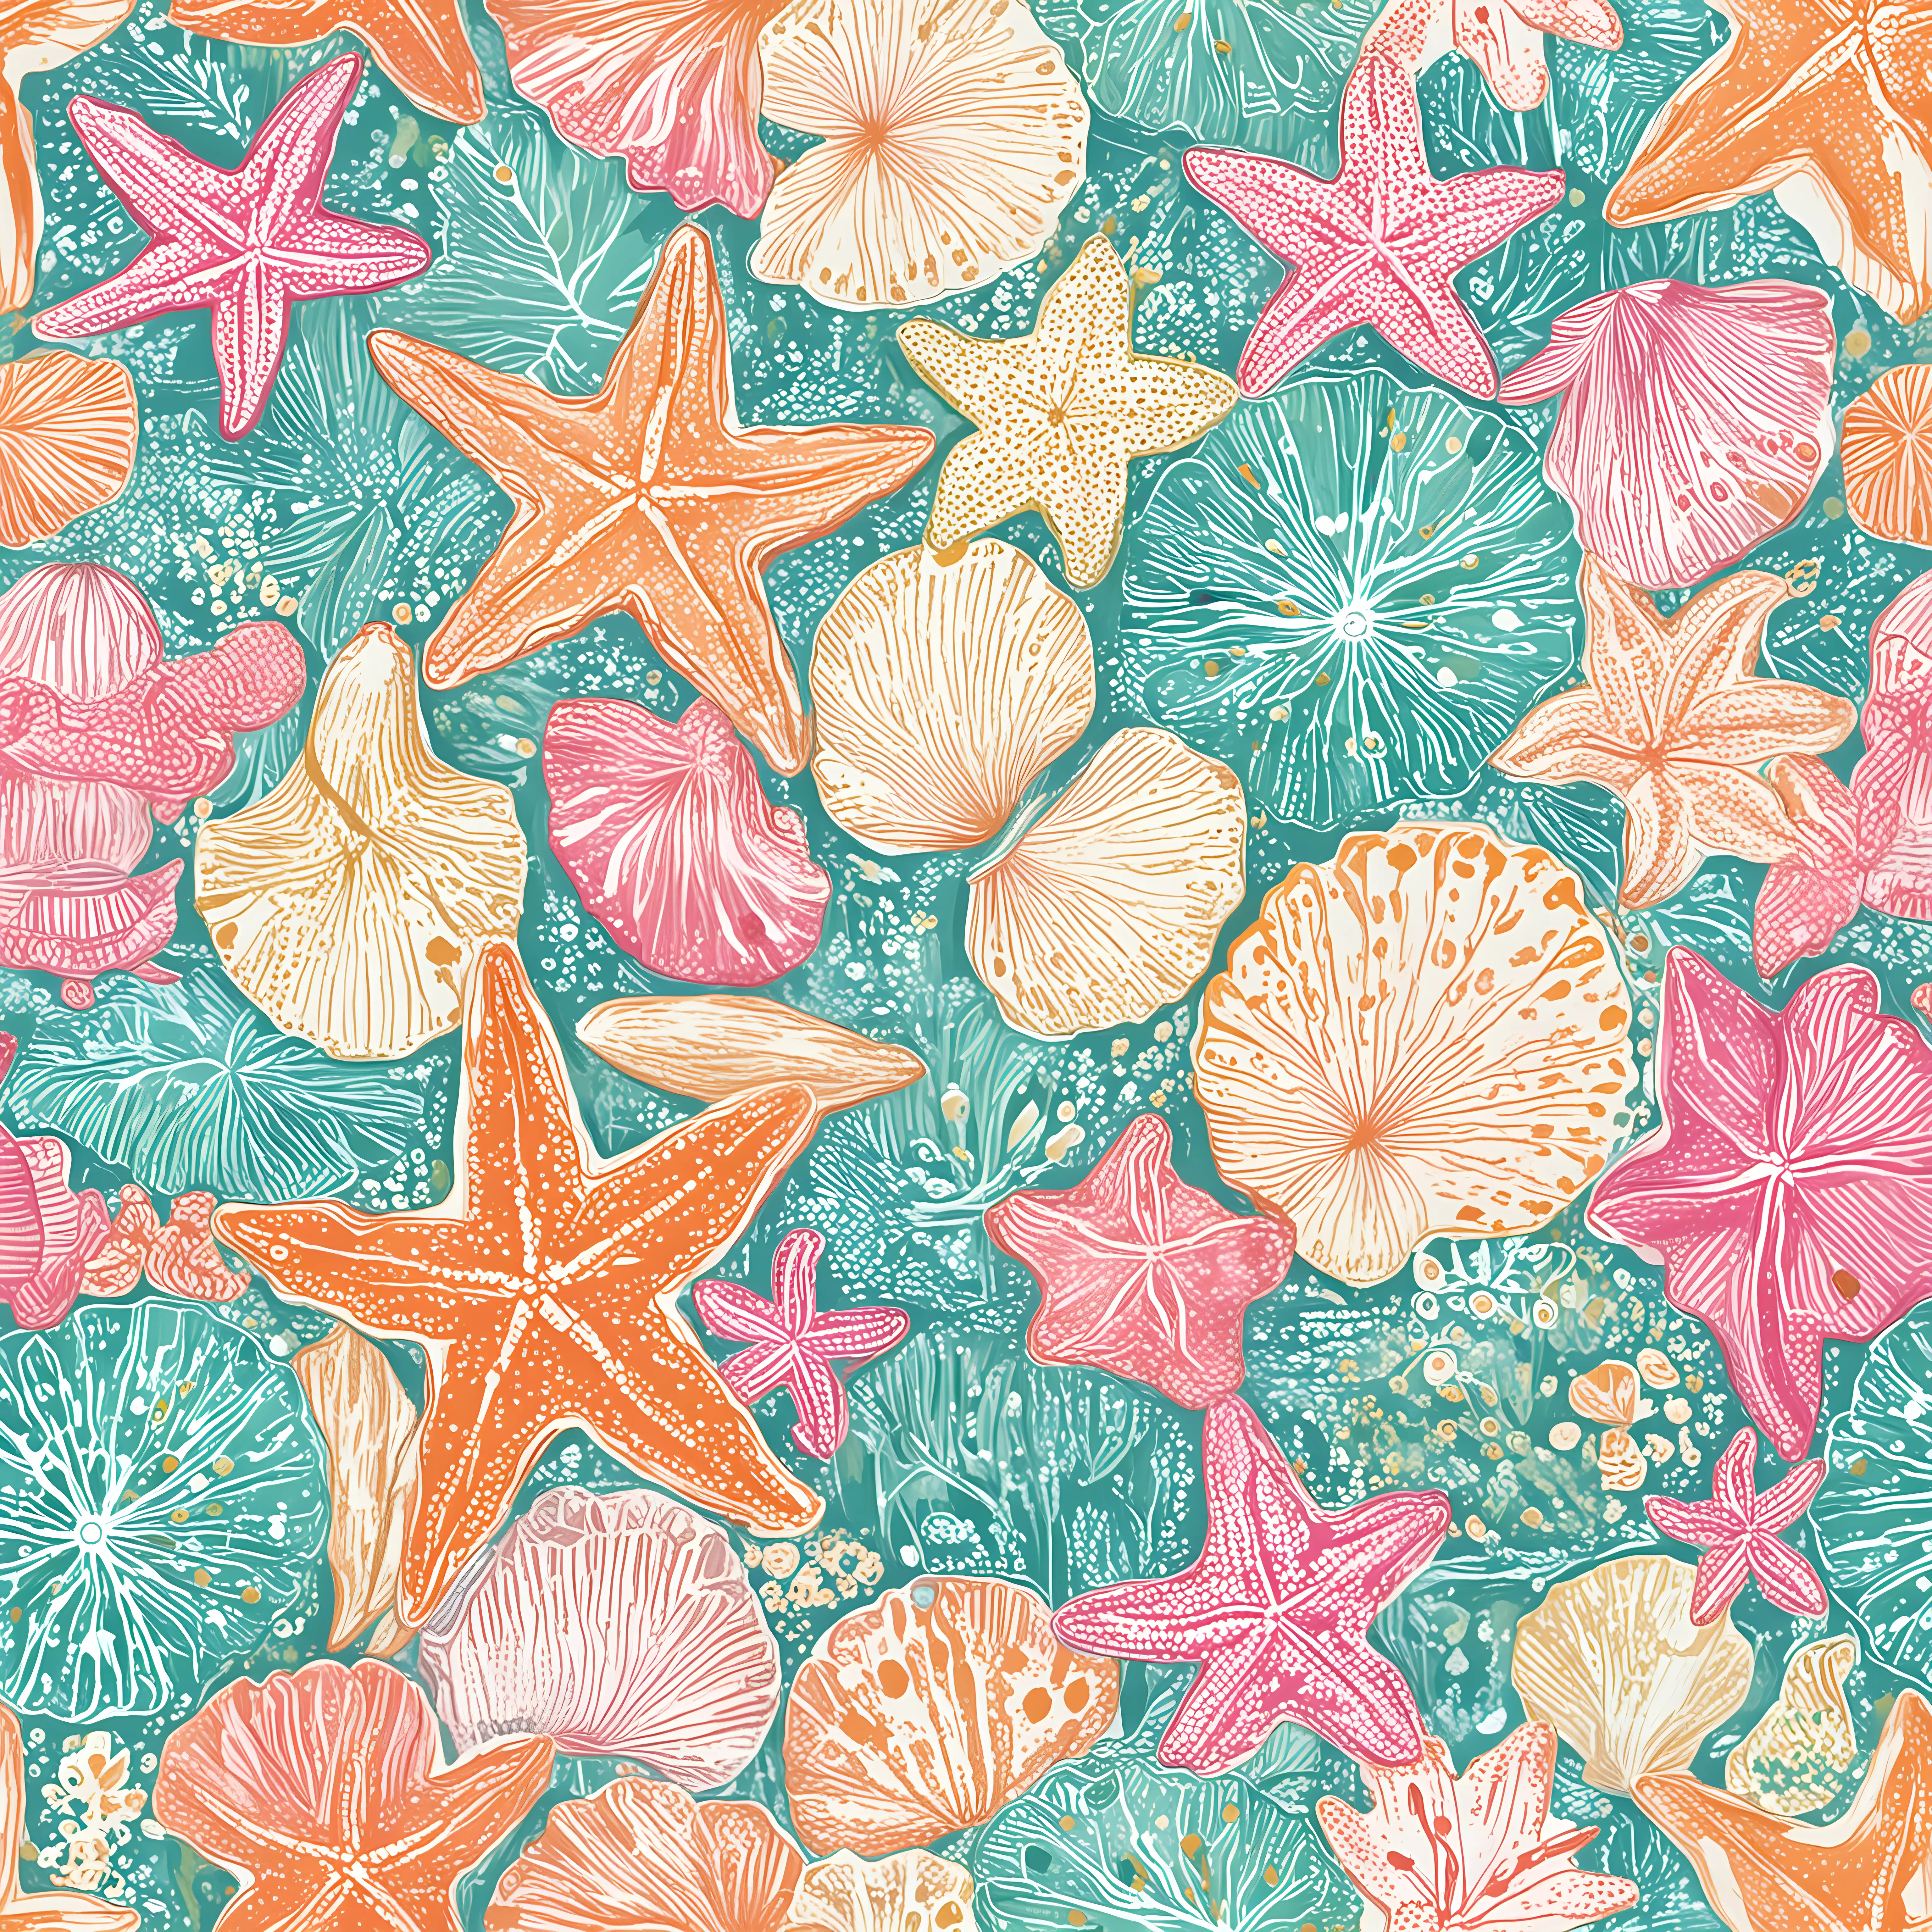 Colorful Seashells and Starfish in Lily Pulitzer Style Illustration